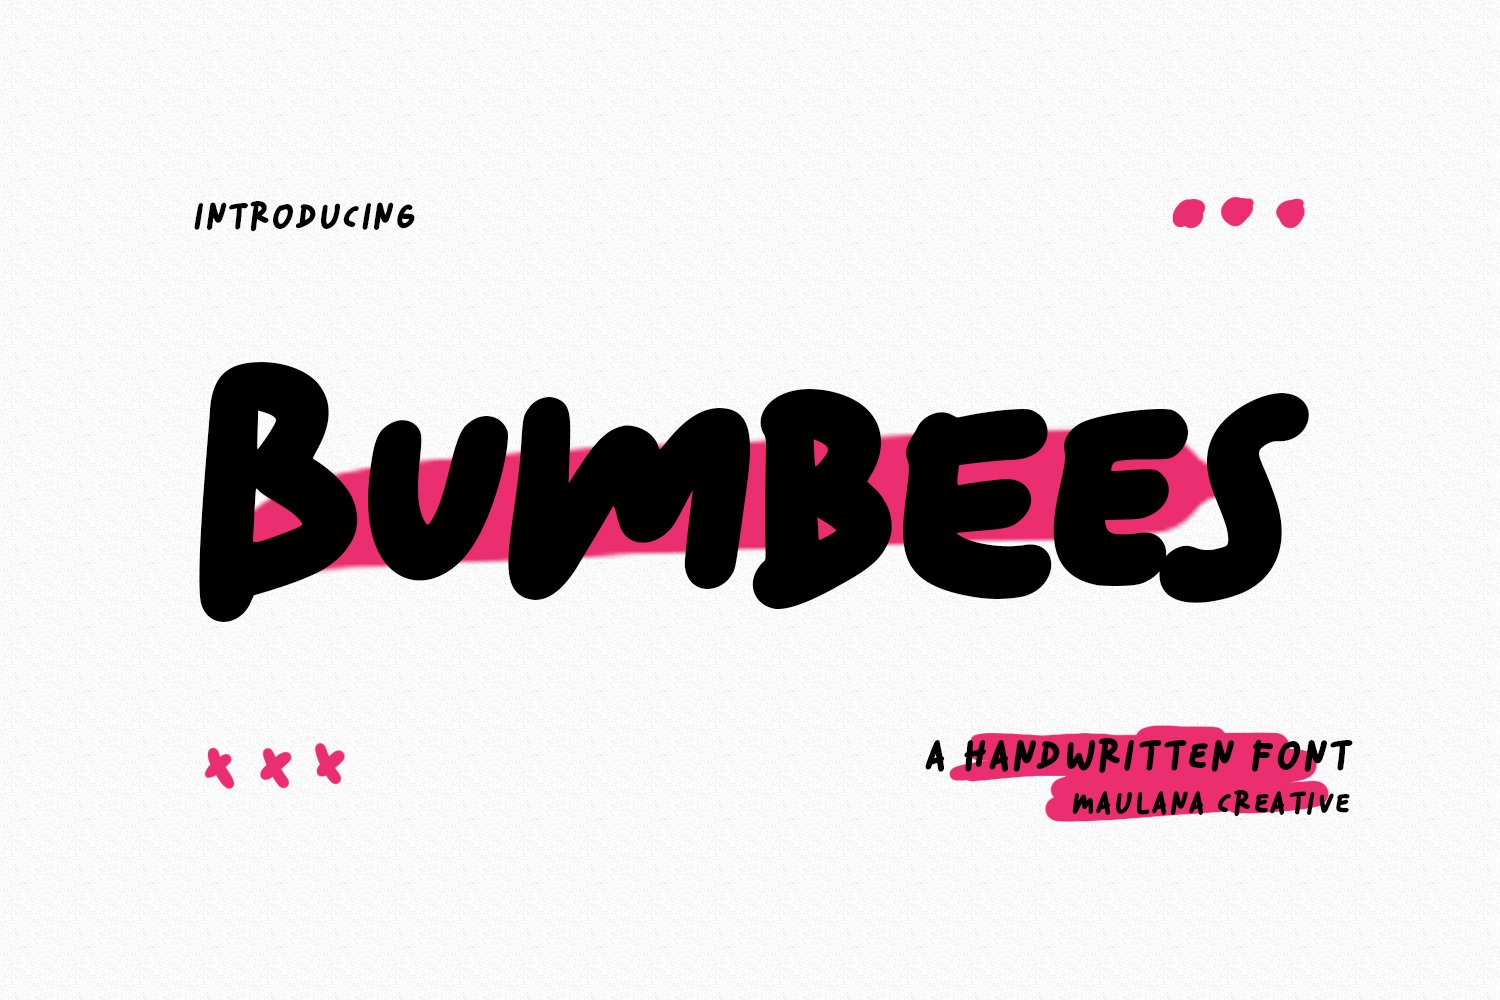 Bumbees Handwritten Font cover image.